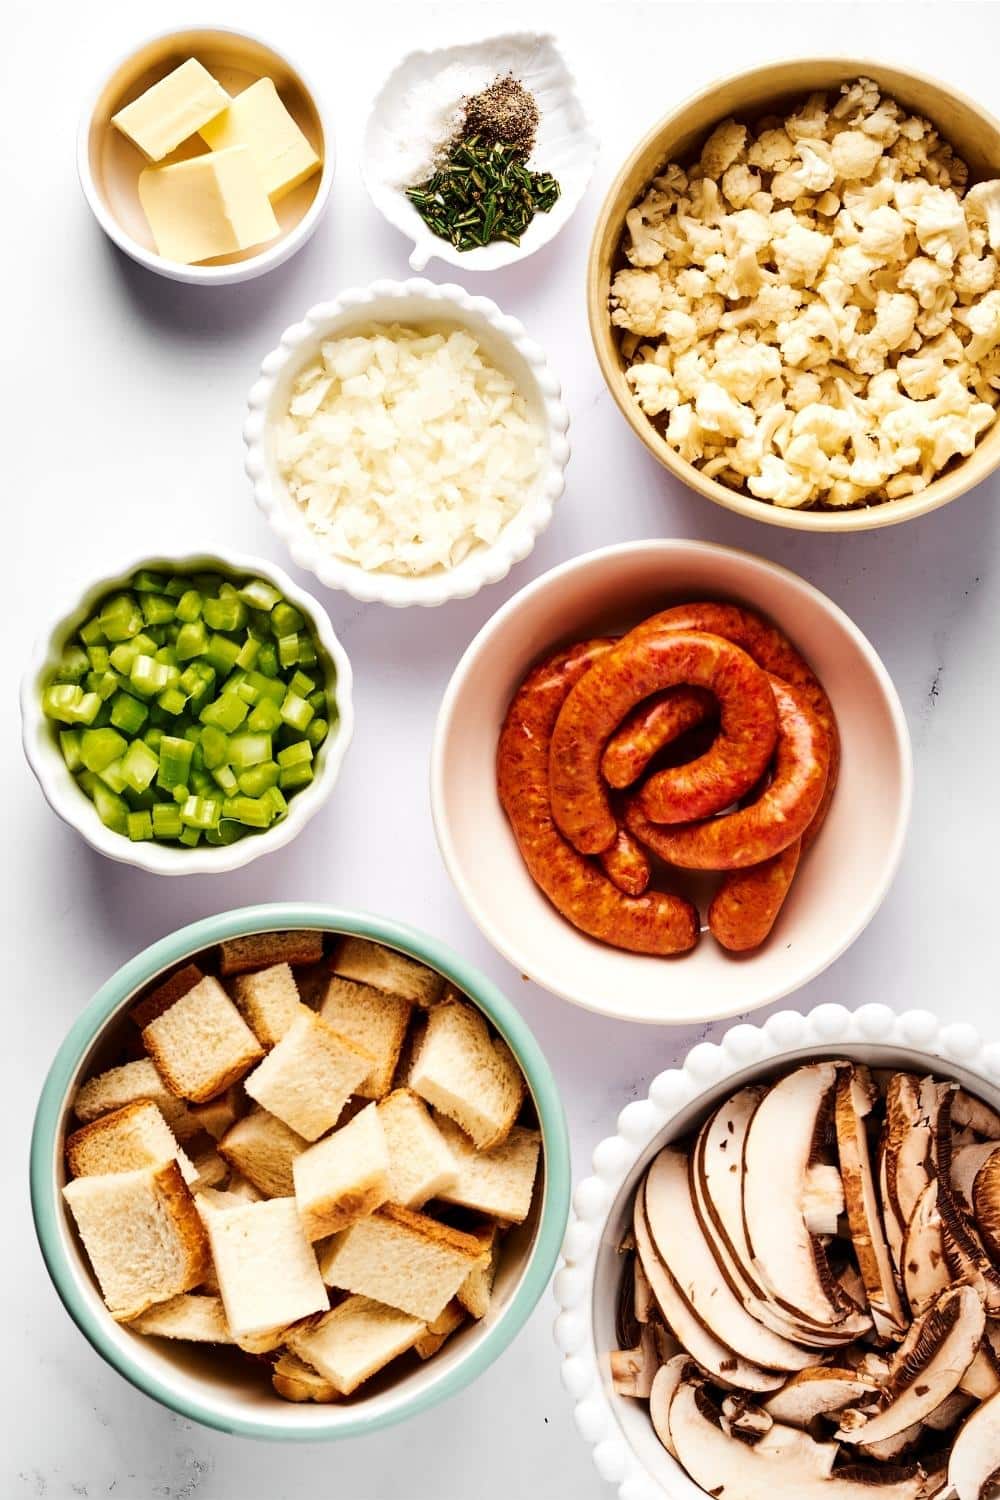 A bowl of bread slices, part of a bowl of mushrooms, a bowl of sausage, a small bowl of green peppers, a small bowl of onion, a small bowl of cauliflower, a small bowl of butter, and a small bowl of seasonings on the white counter.